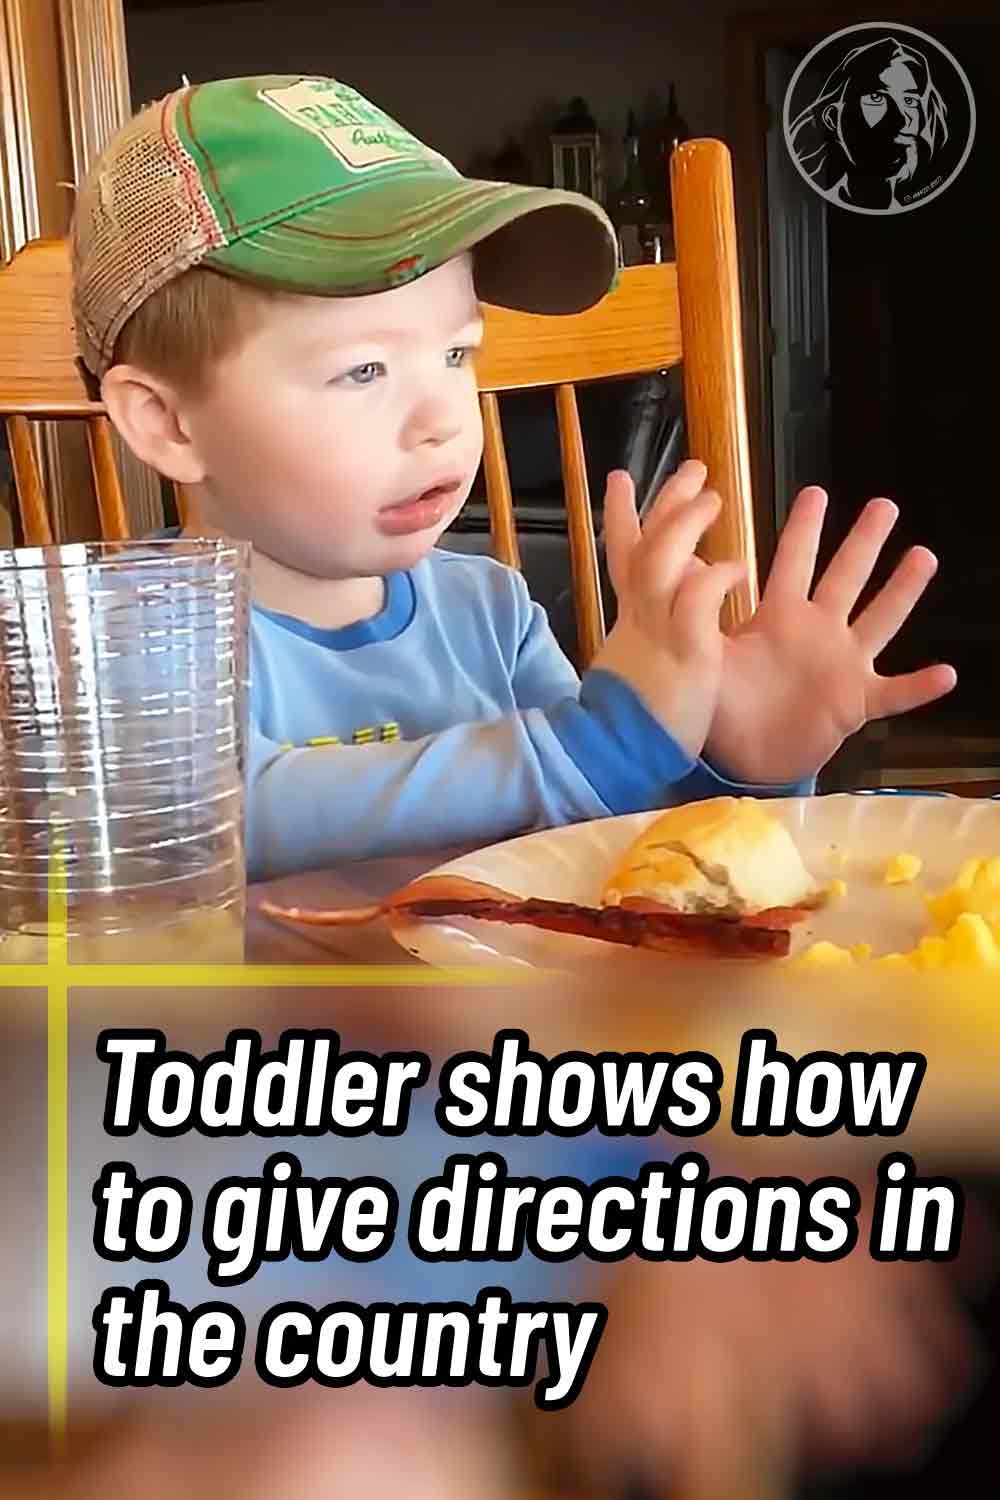 Toddler shows how to give directions in the country